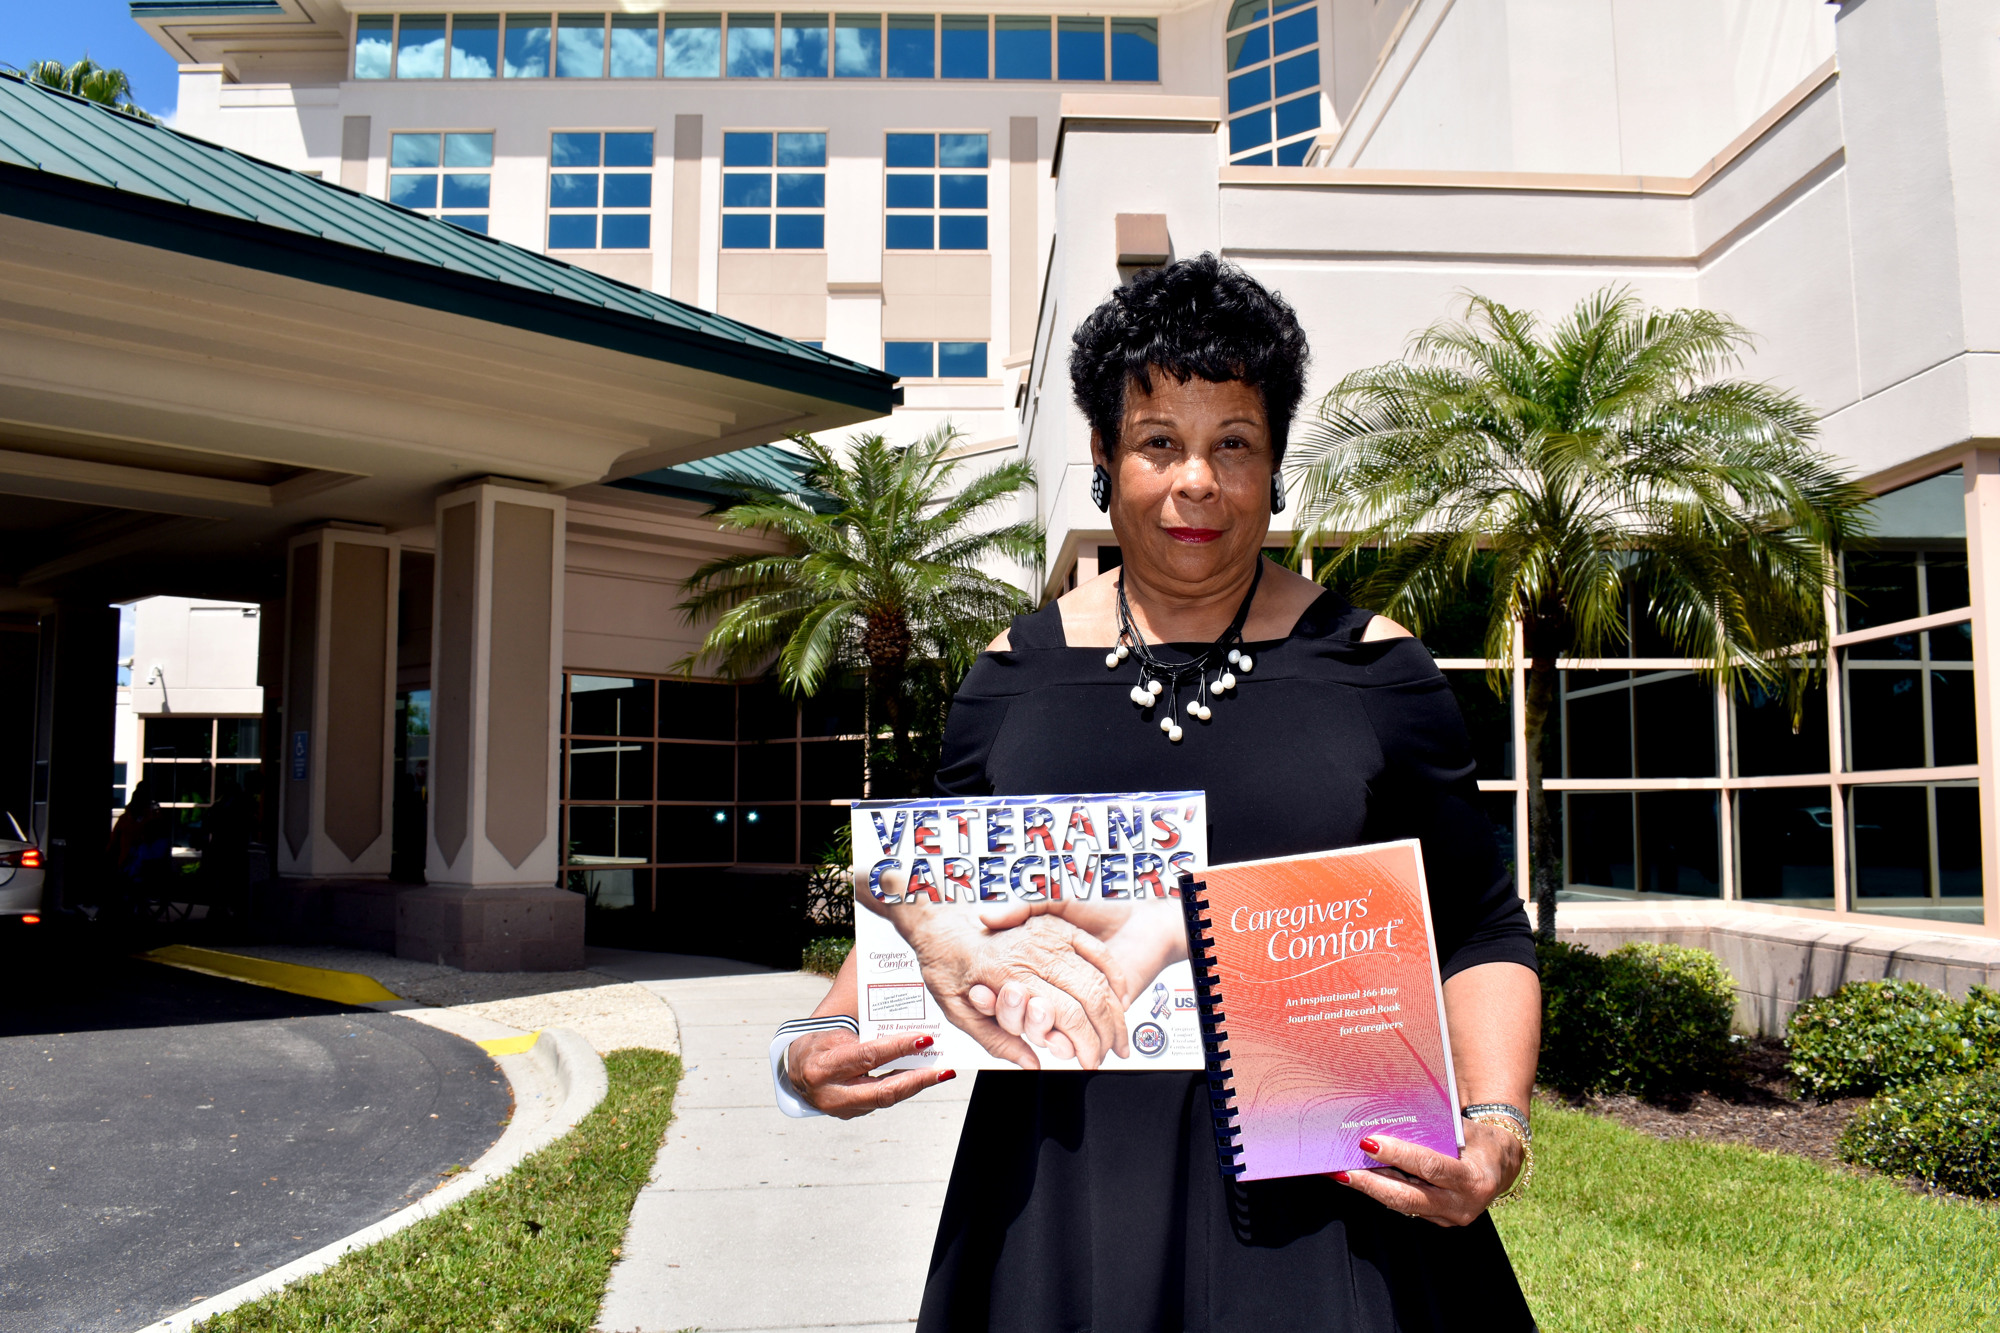 Julie Cook Downing facilitates a caregiving support group at Doctors Hospital of Sarasota. She has self-published a book and calendar to help caregivers.